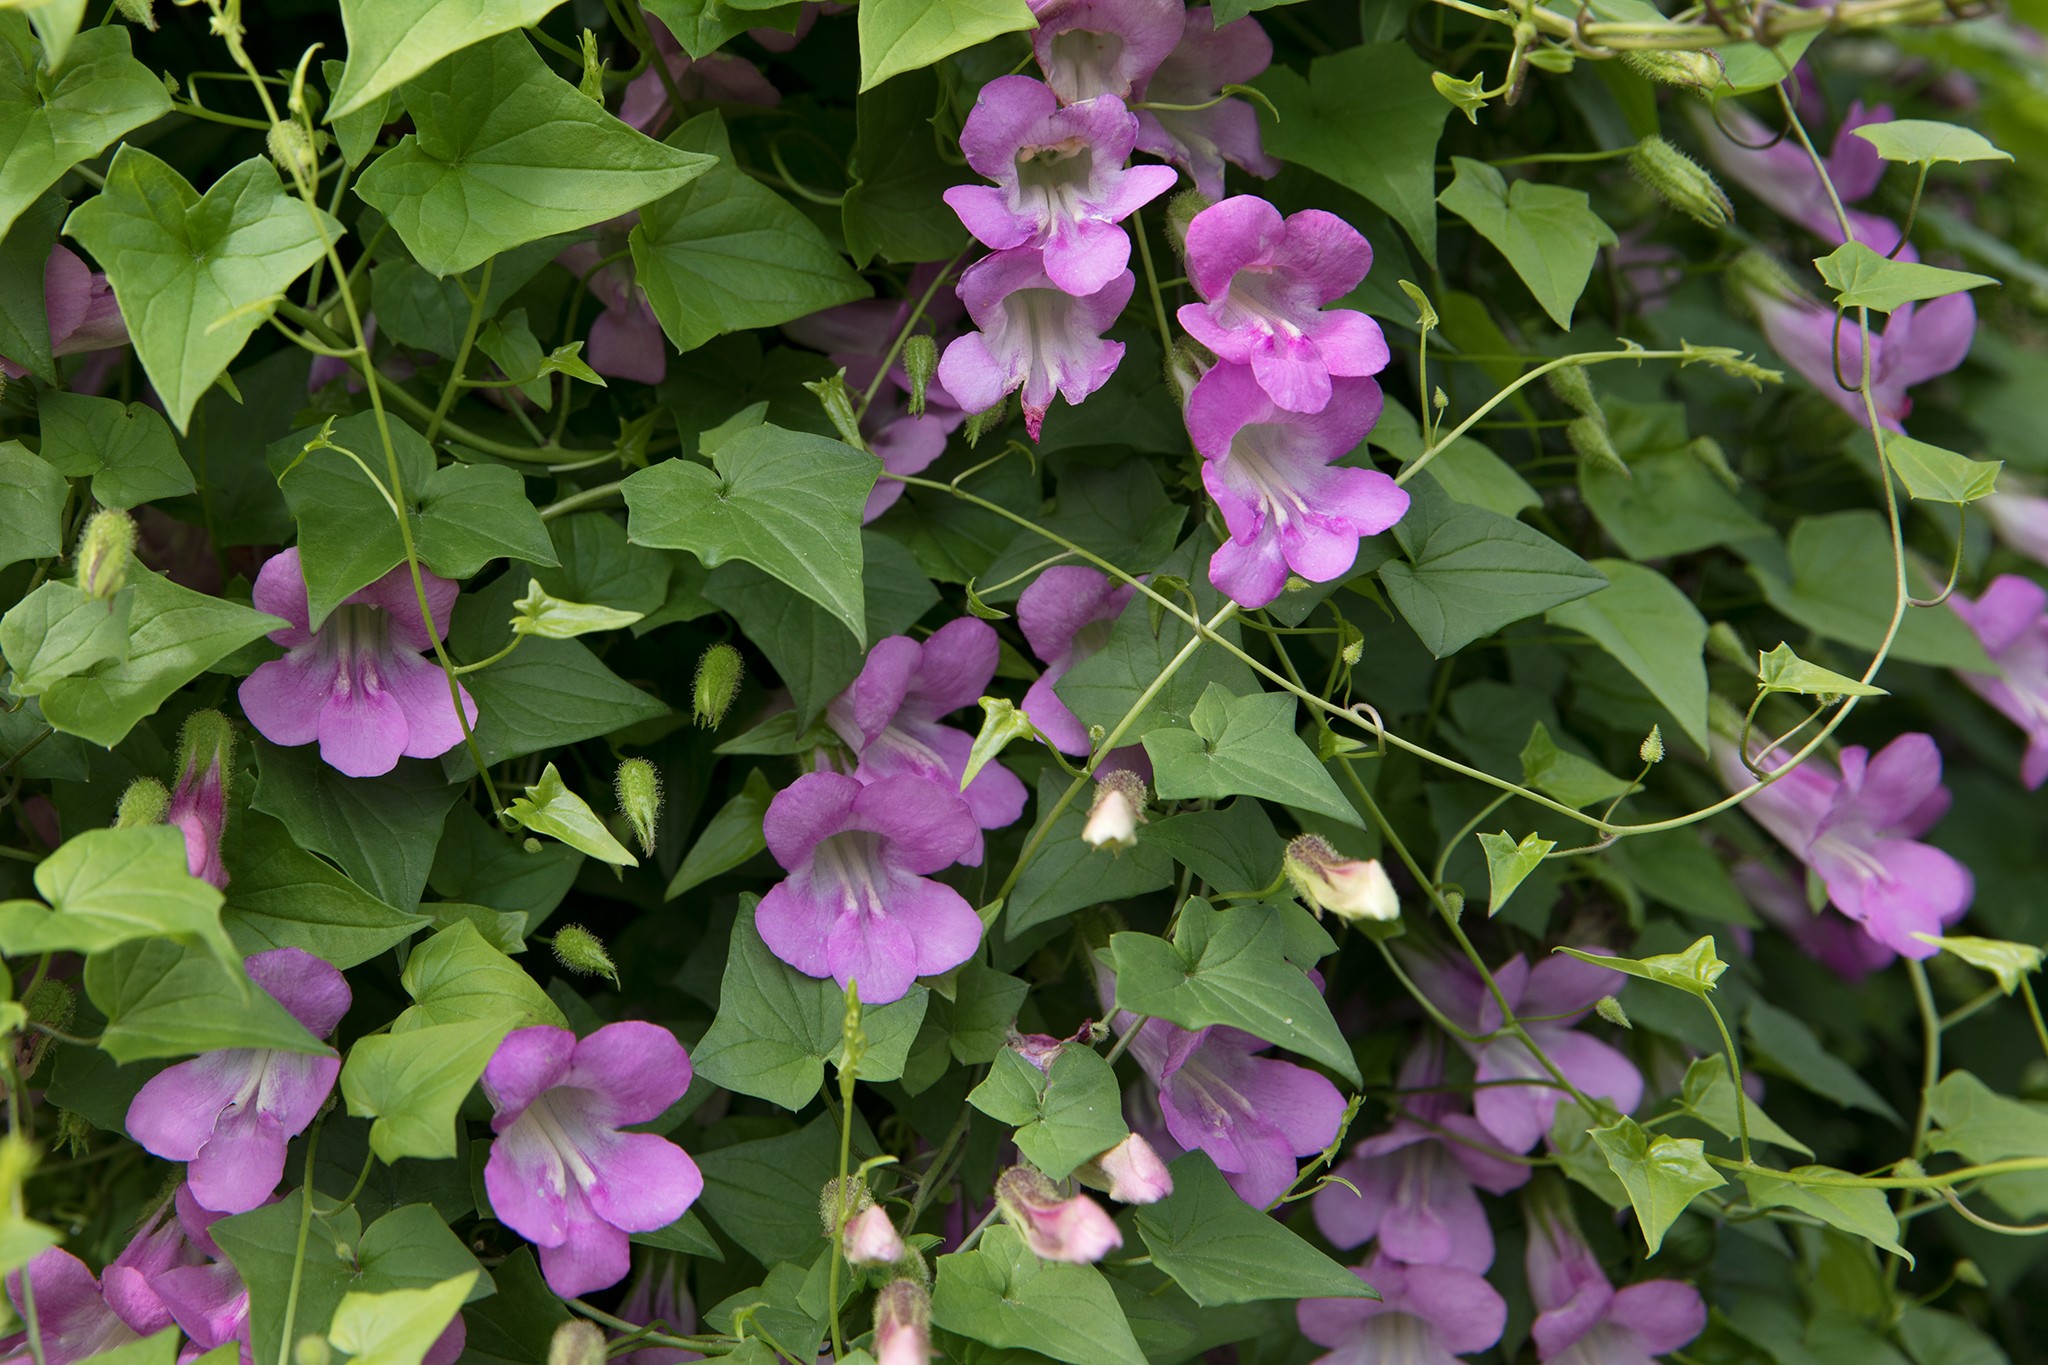 Climbers from seed - Asarina scandens